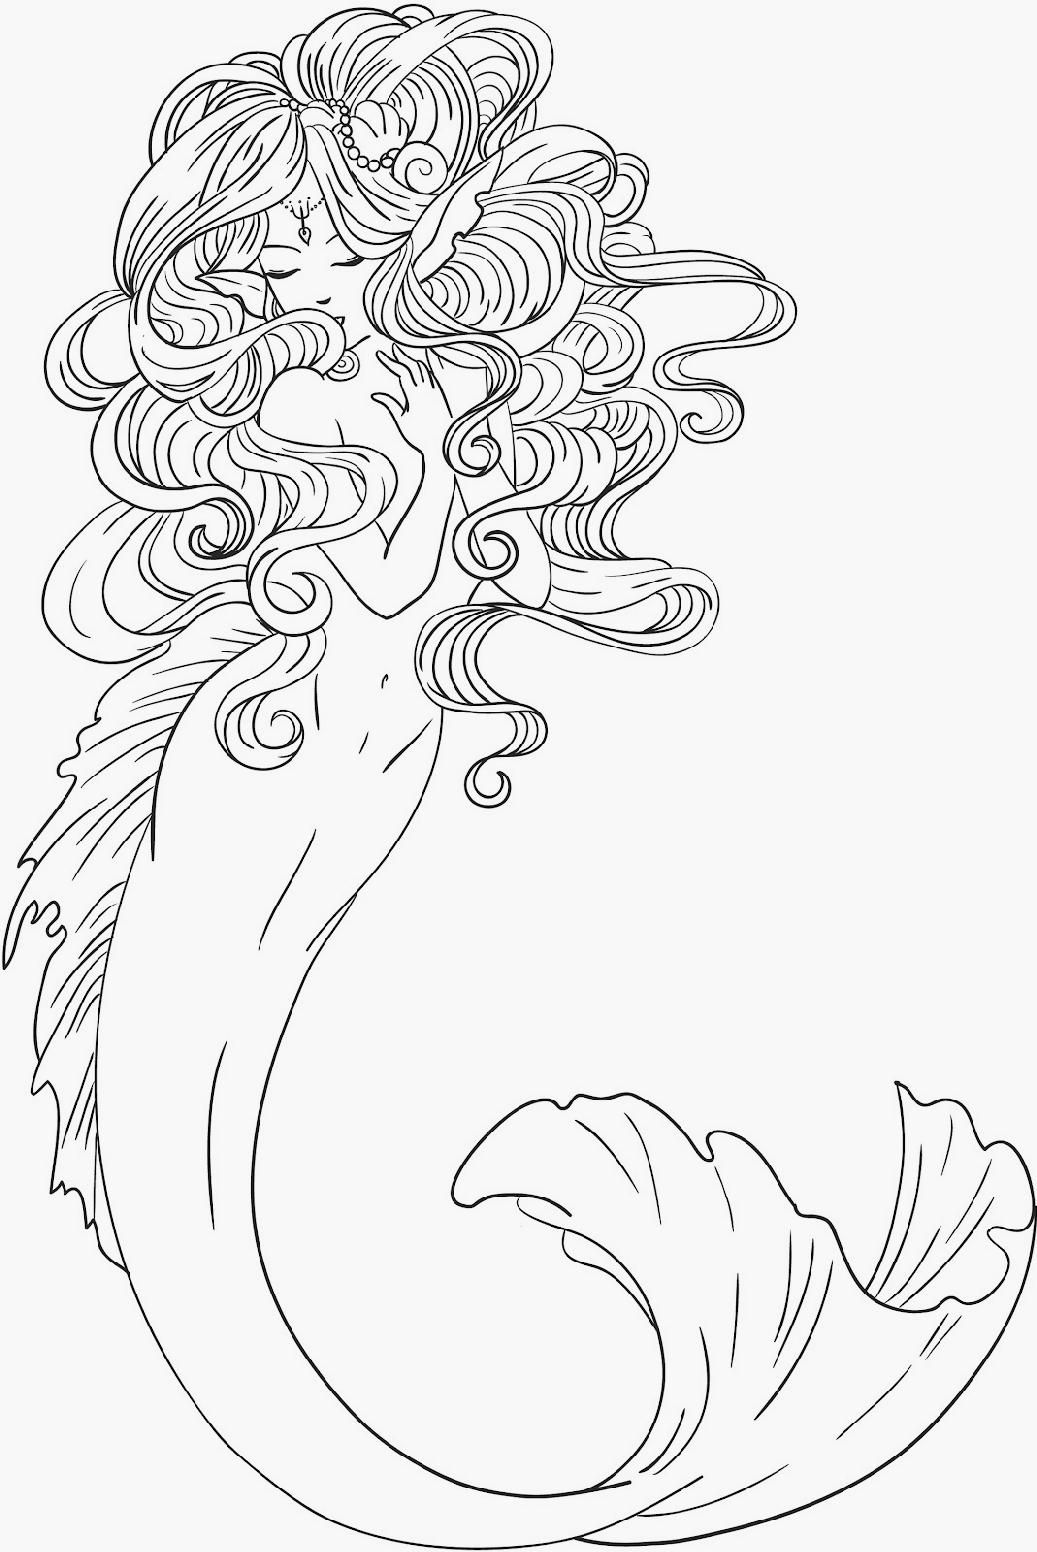 free printable coloring pages for adults mermaids